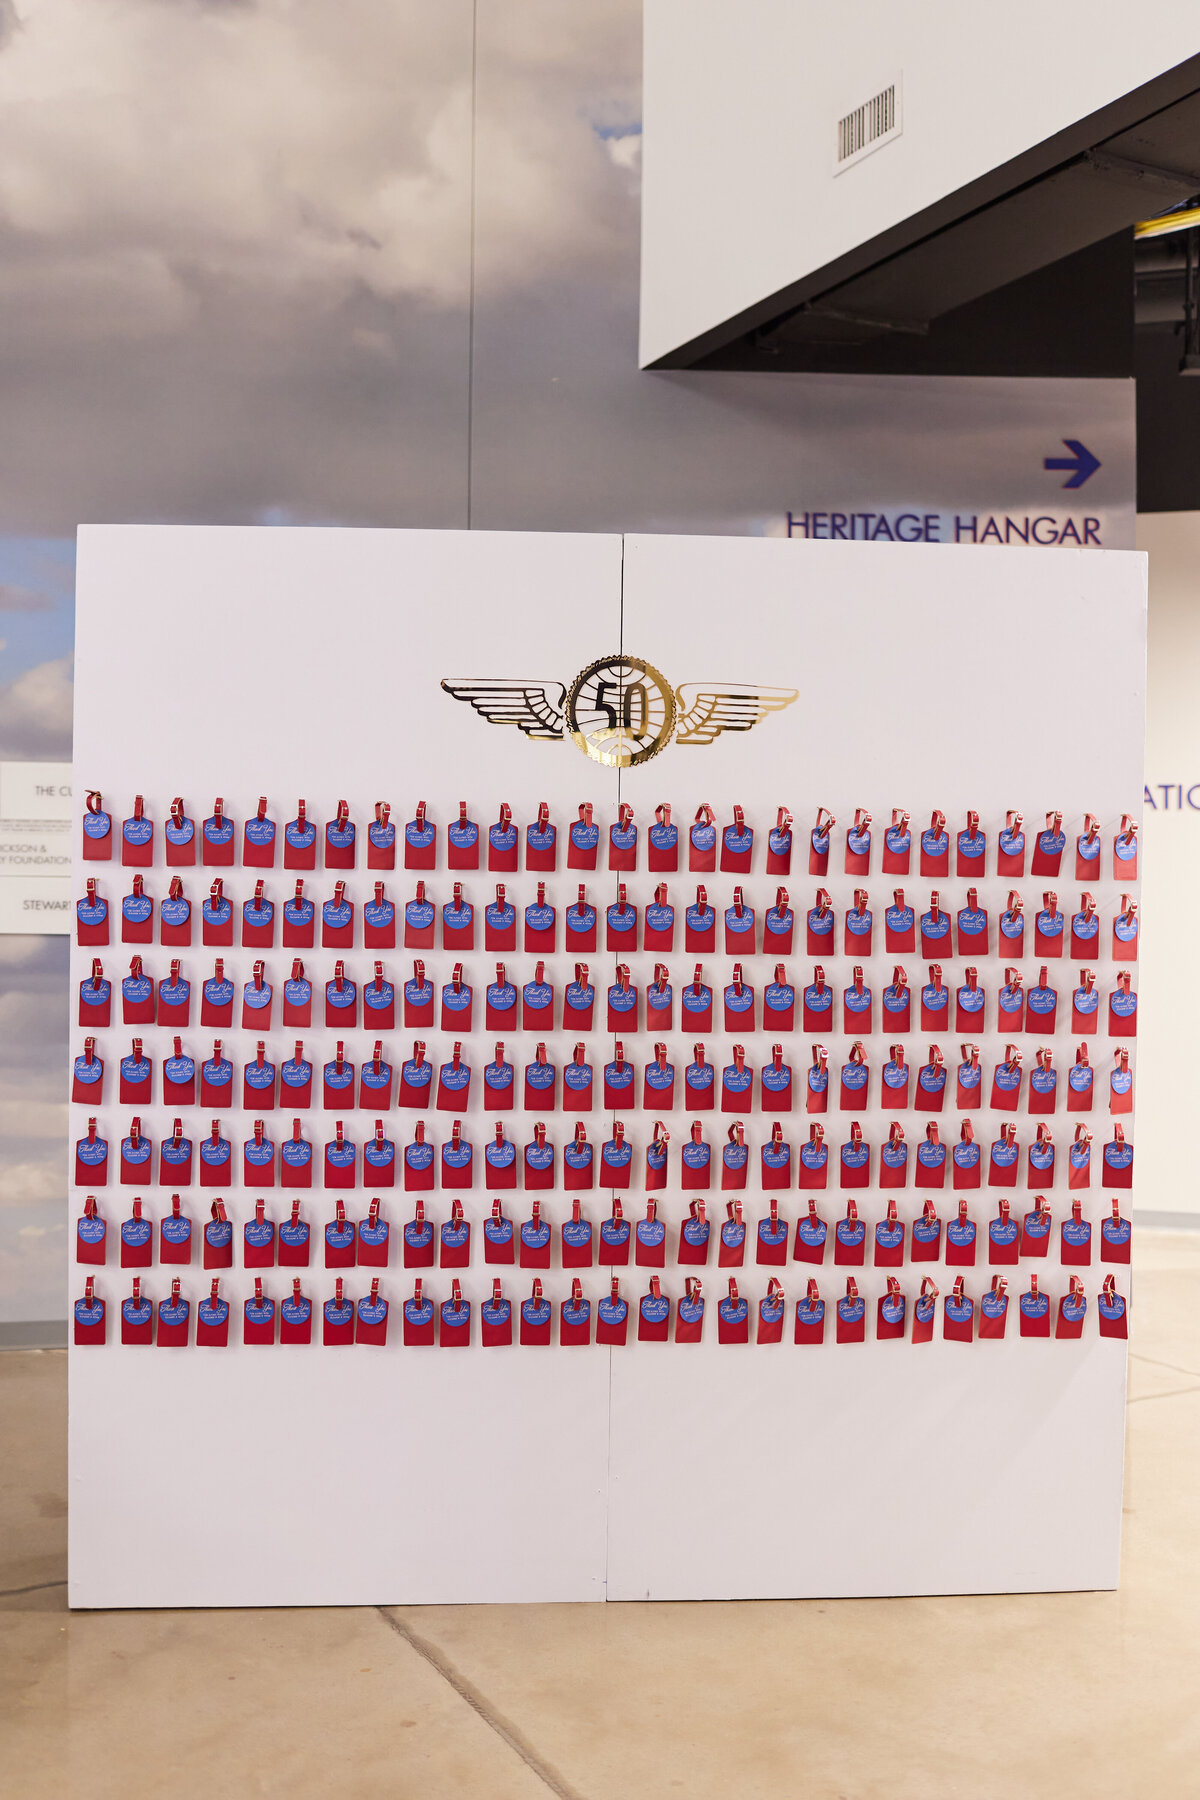 Lone Star Flight Museum Houston event seating chart display with name tags